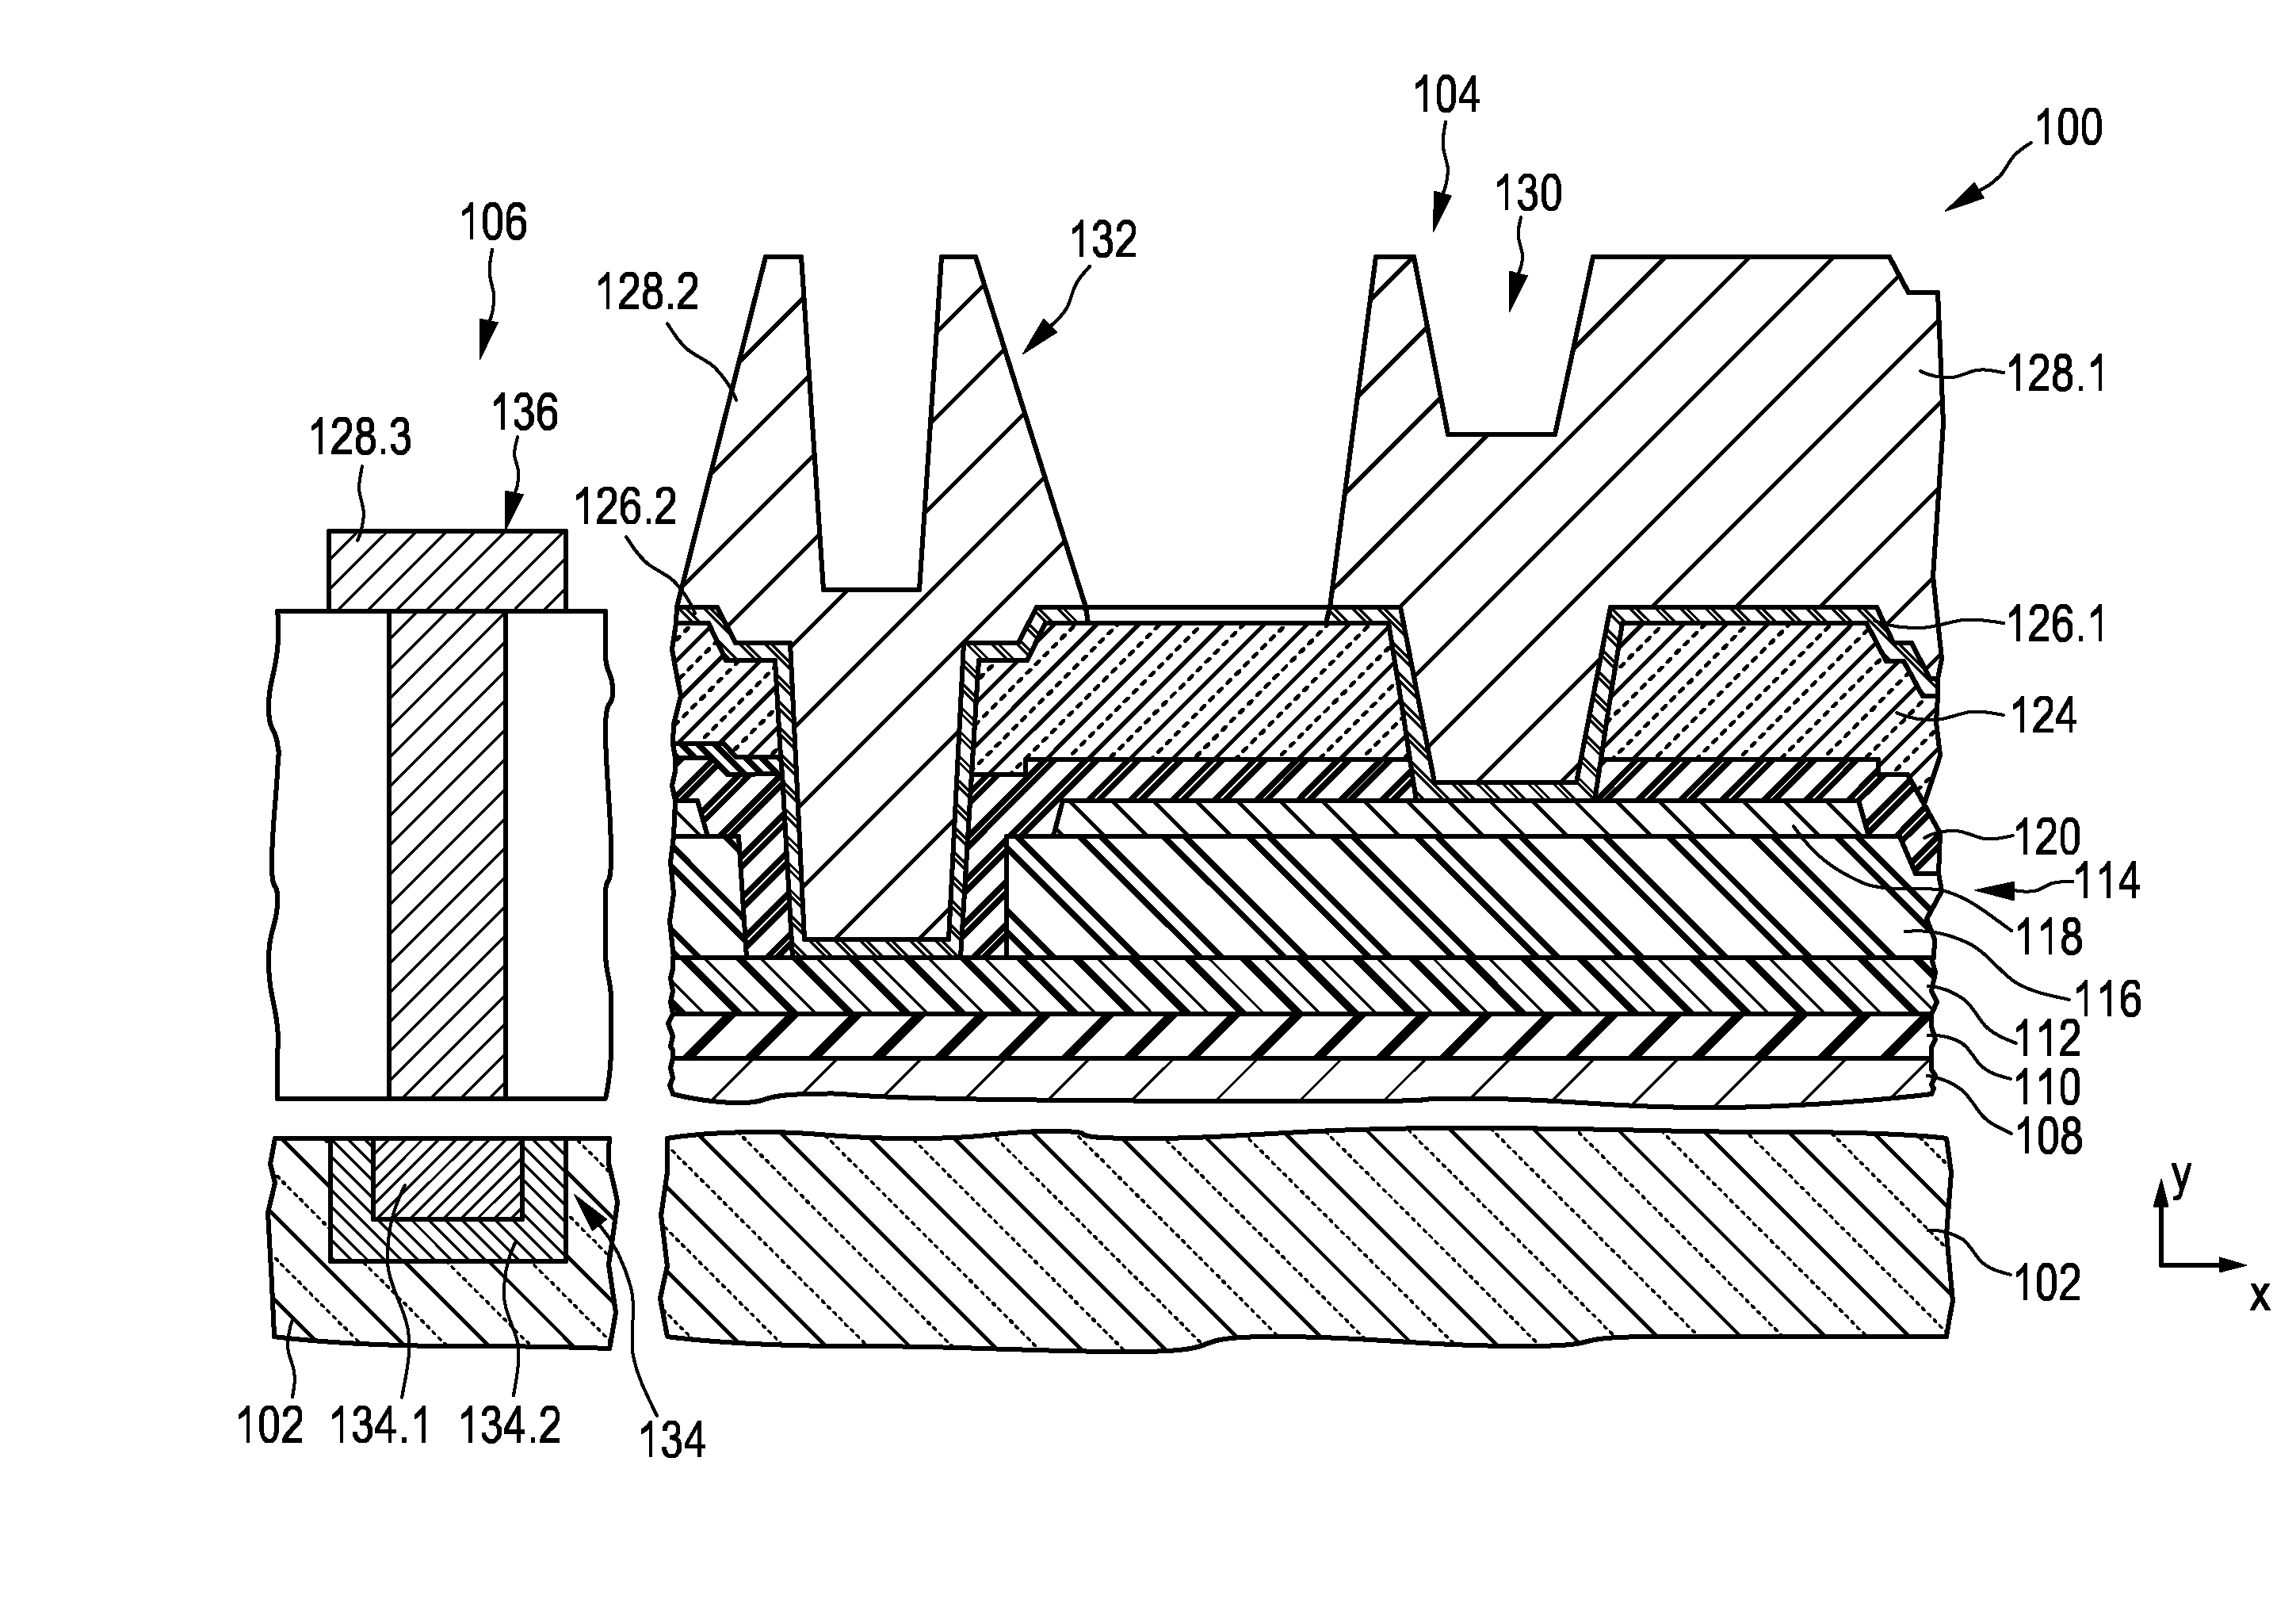 Method for fabricating an integrated-passives device with a MIM capacitor and a high-accuracy resistor on top